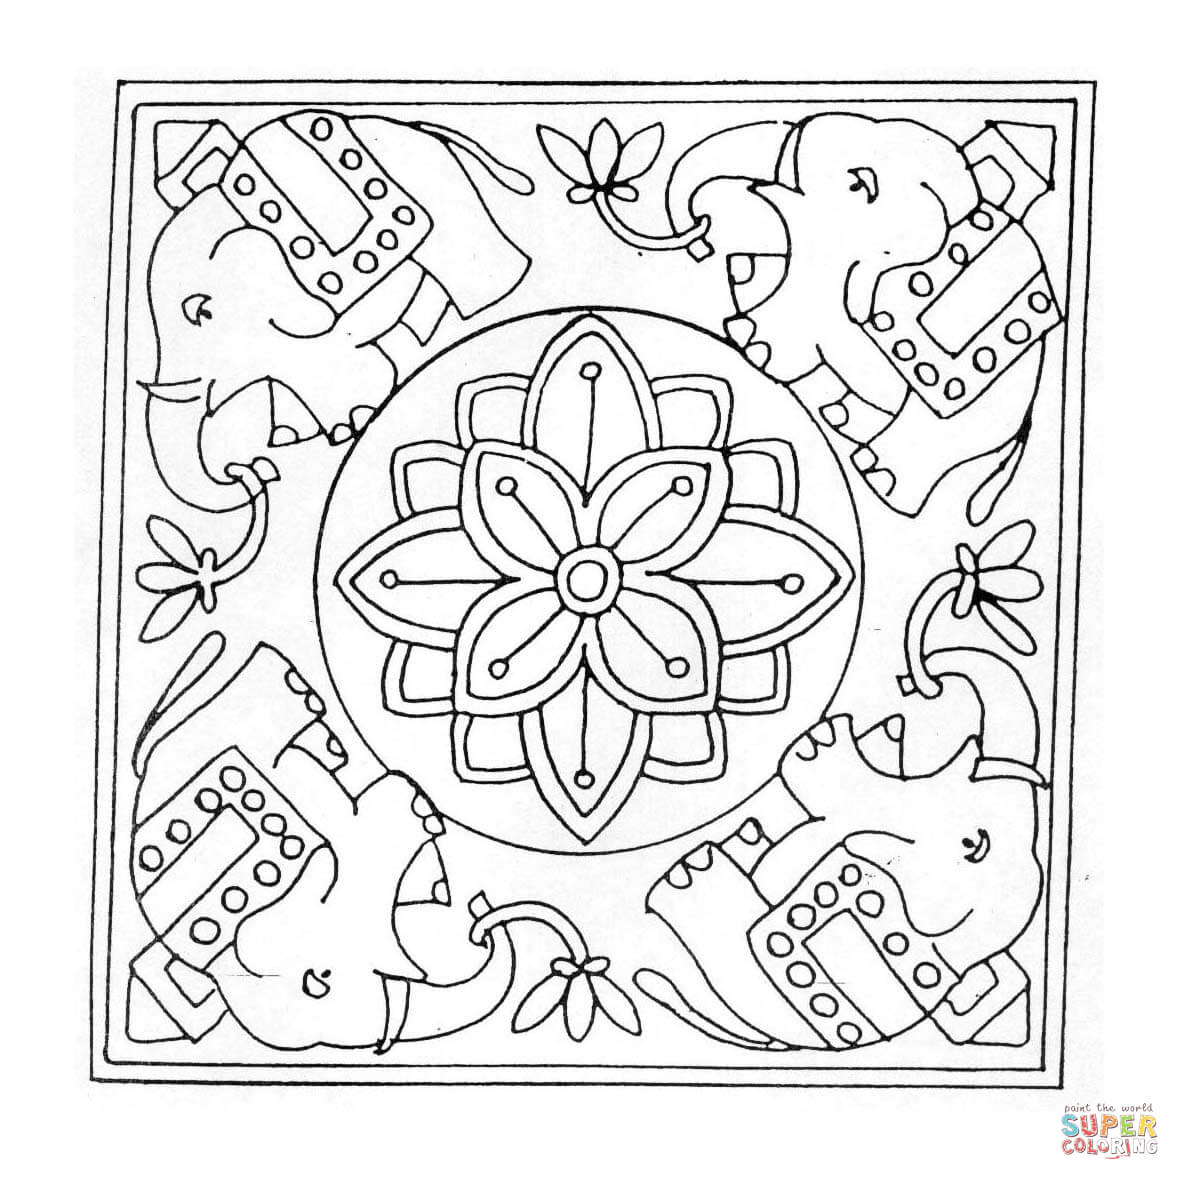 Elephant Mandala coloring page | Free Printable Coloring Pages